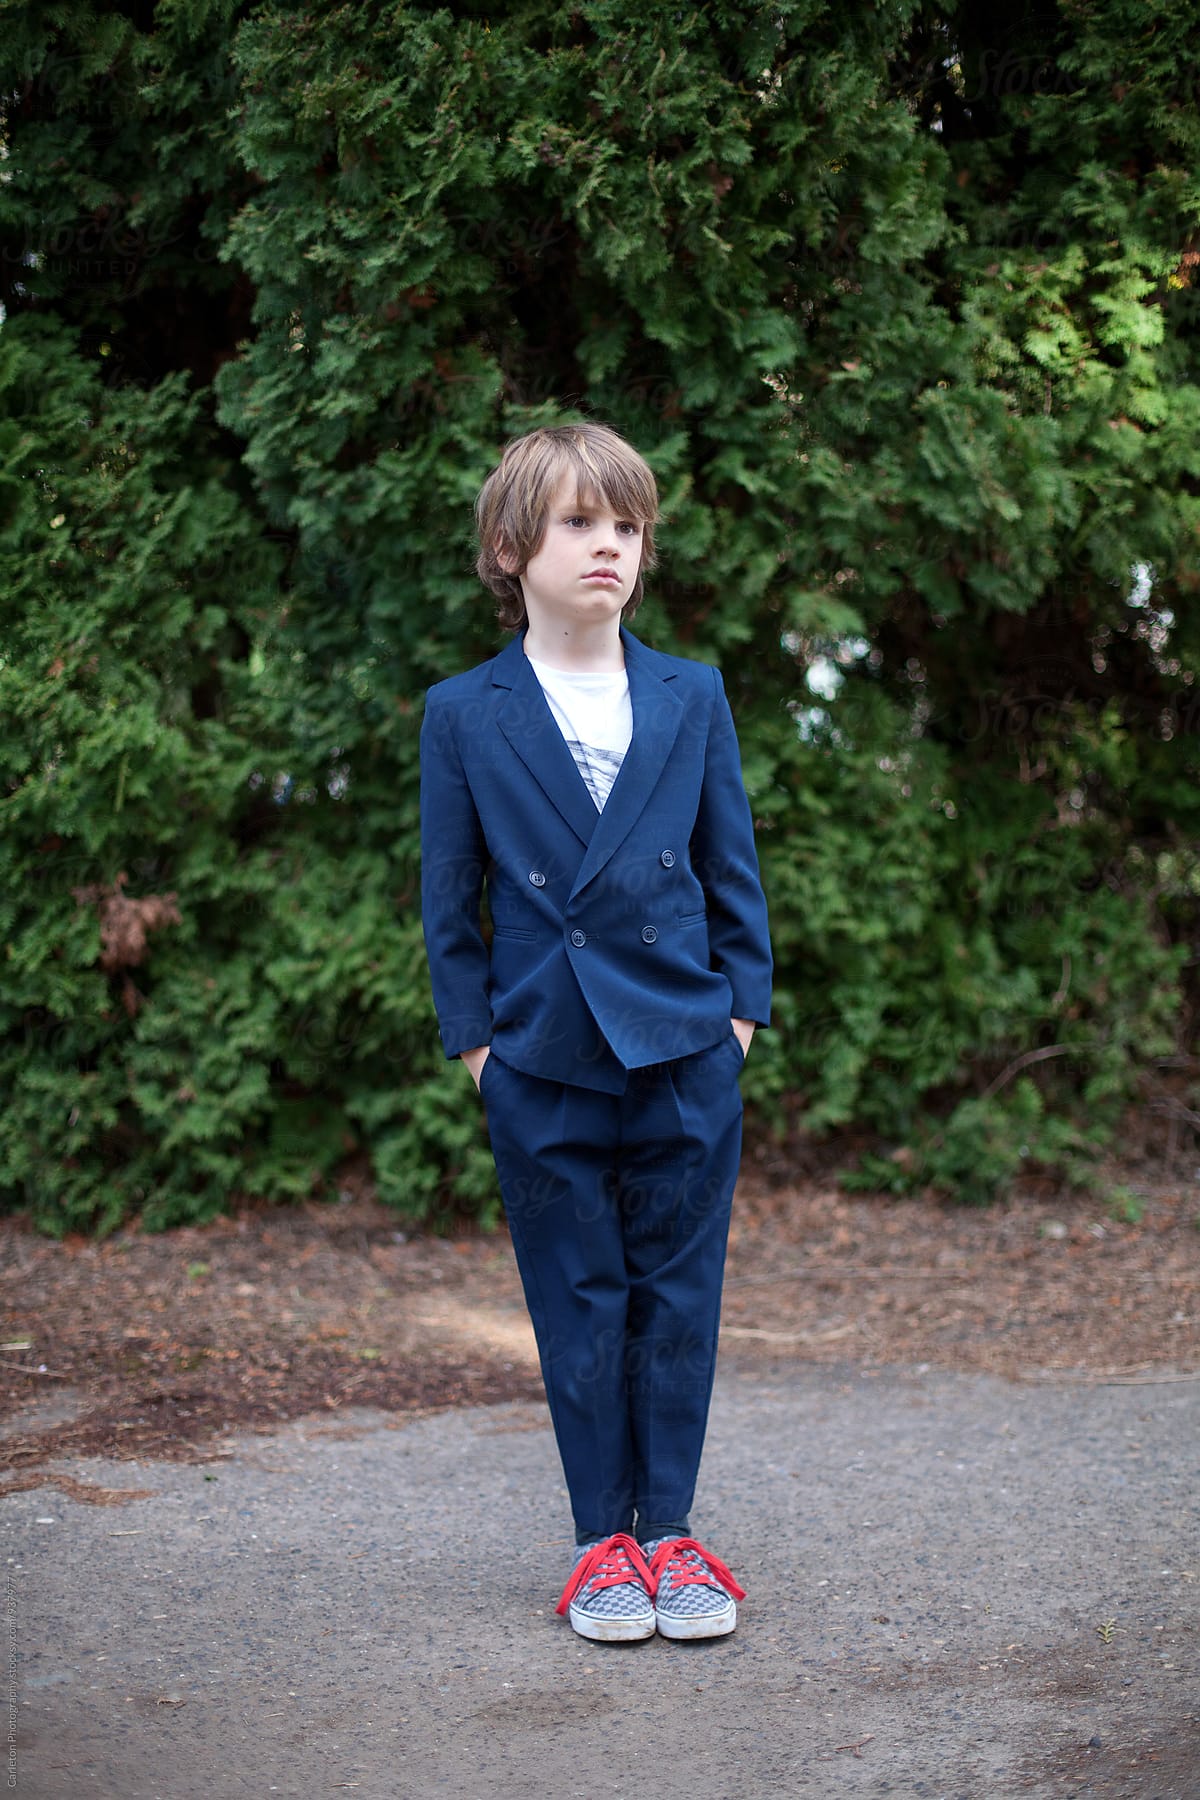 Boy in blue suit with t-shirt and skater shoes